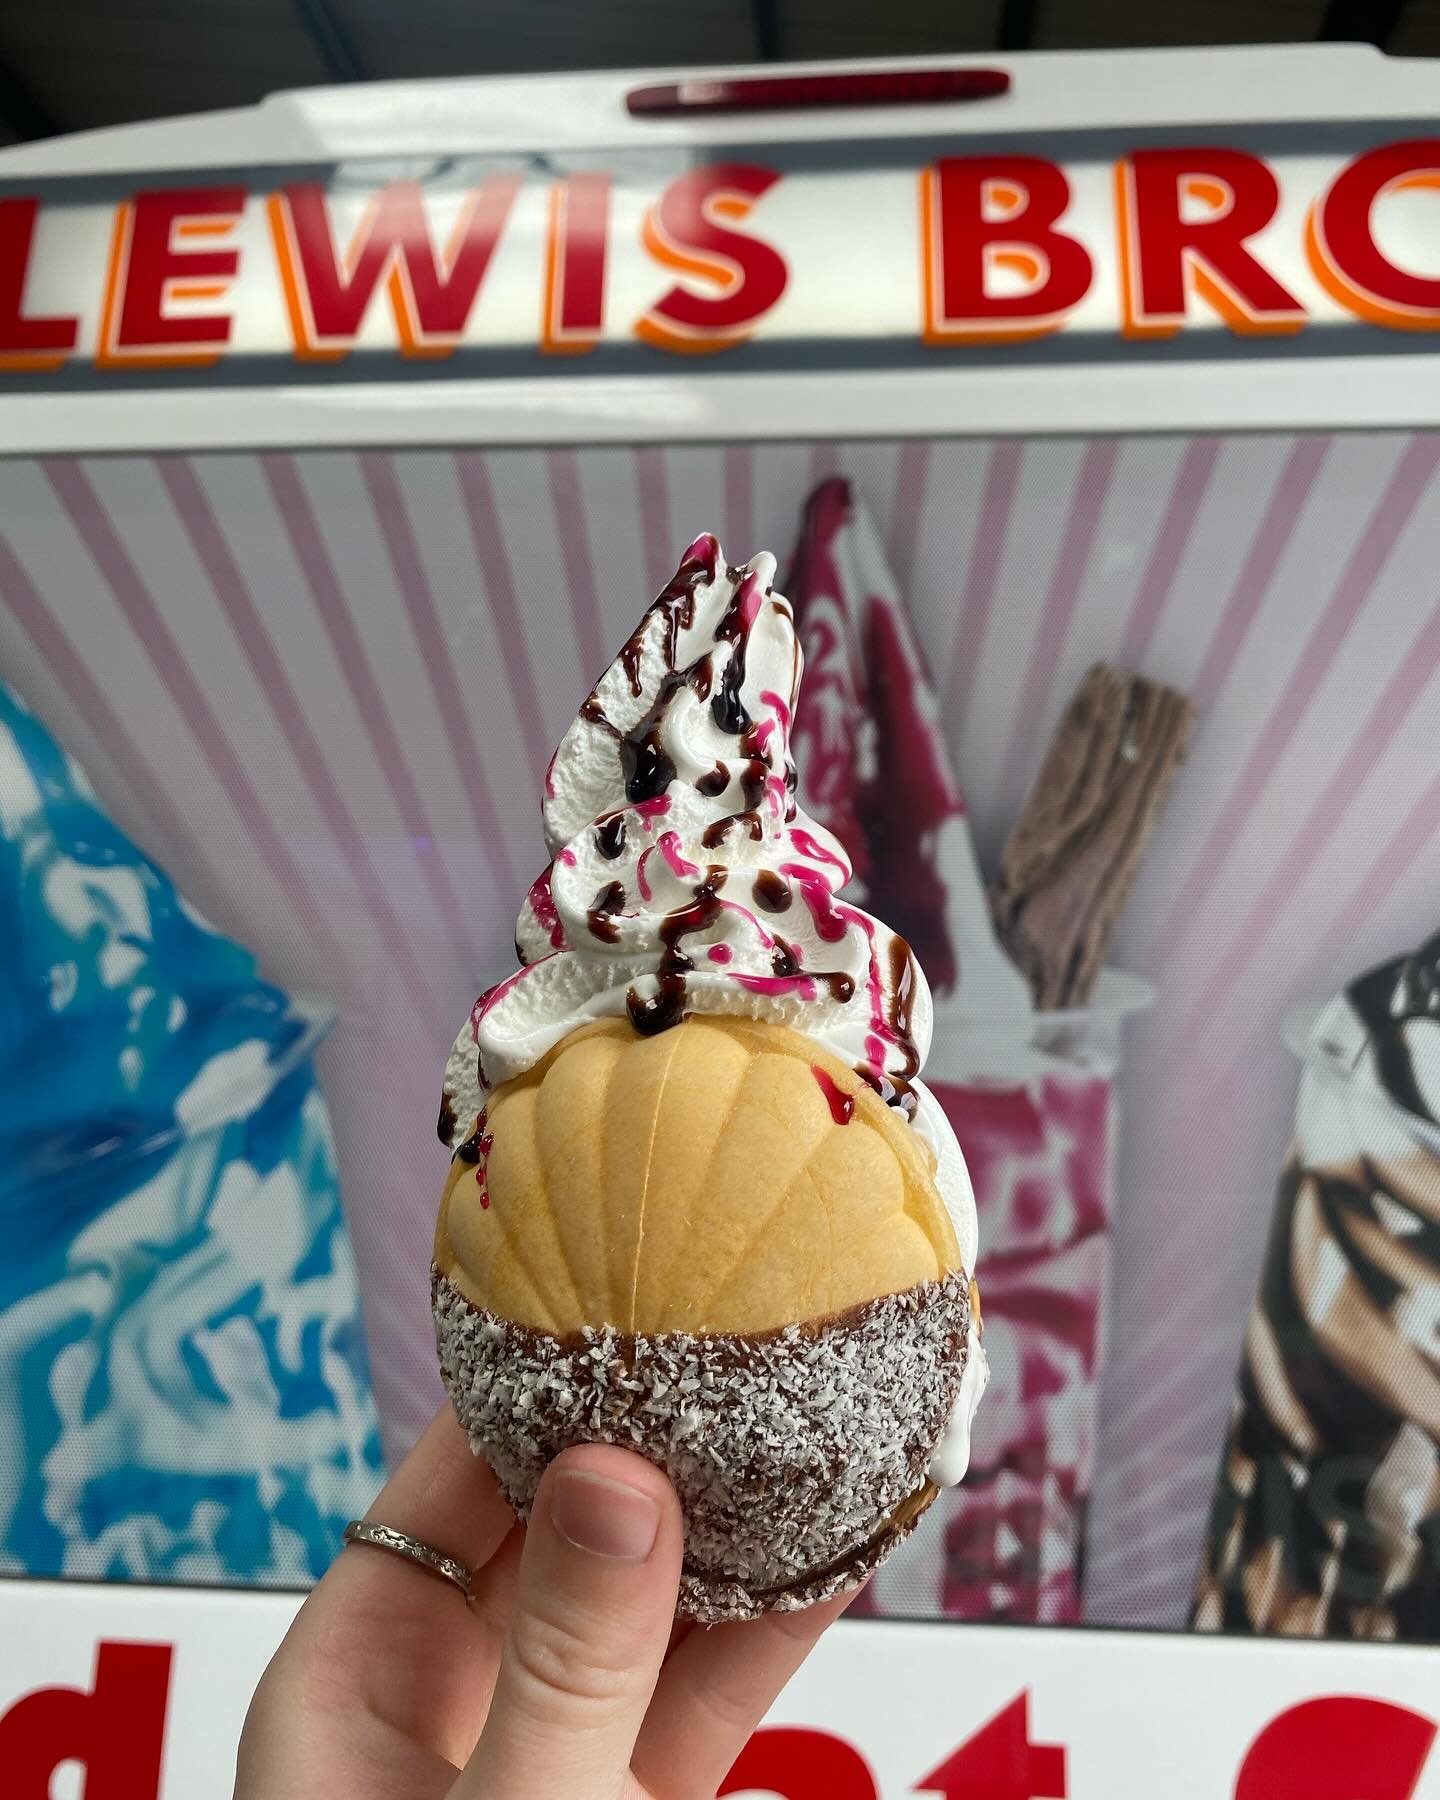 Do you like to mix your sauces??

#lewisbrosicecream #icecream #icecreamlover #flake #icecreamvan #sweet #sweettreats #vanlife #dessert #local #warrington #manchester #manchesterfood #cheshire #warringtonbusiness #desserts #sunny #chocolate #chocolat